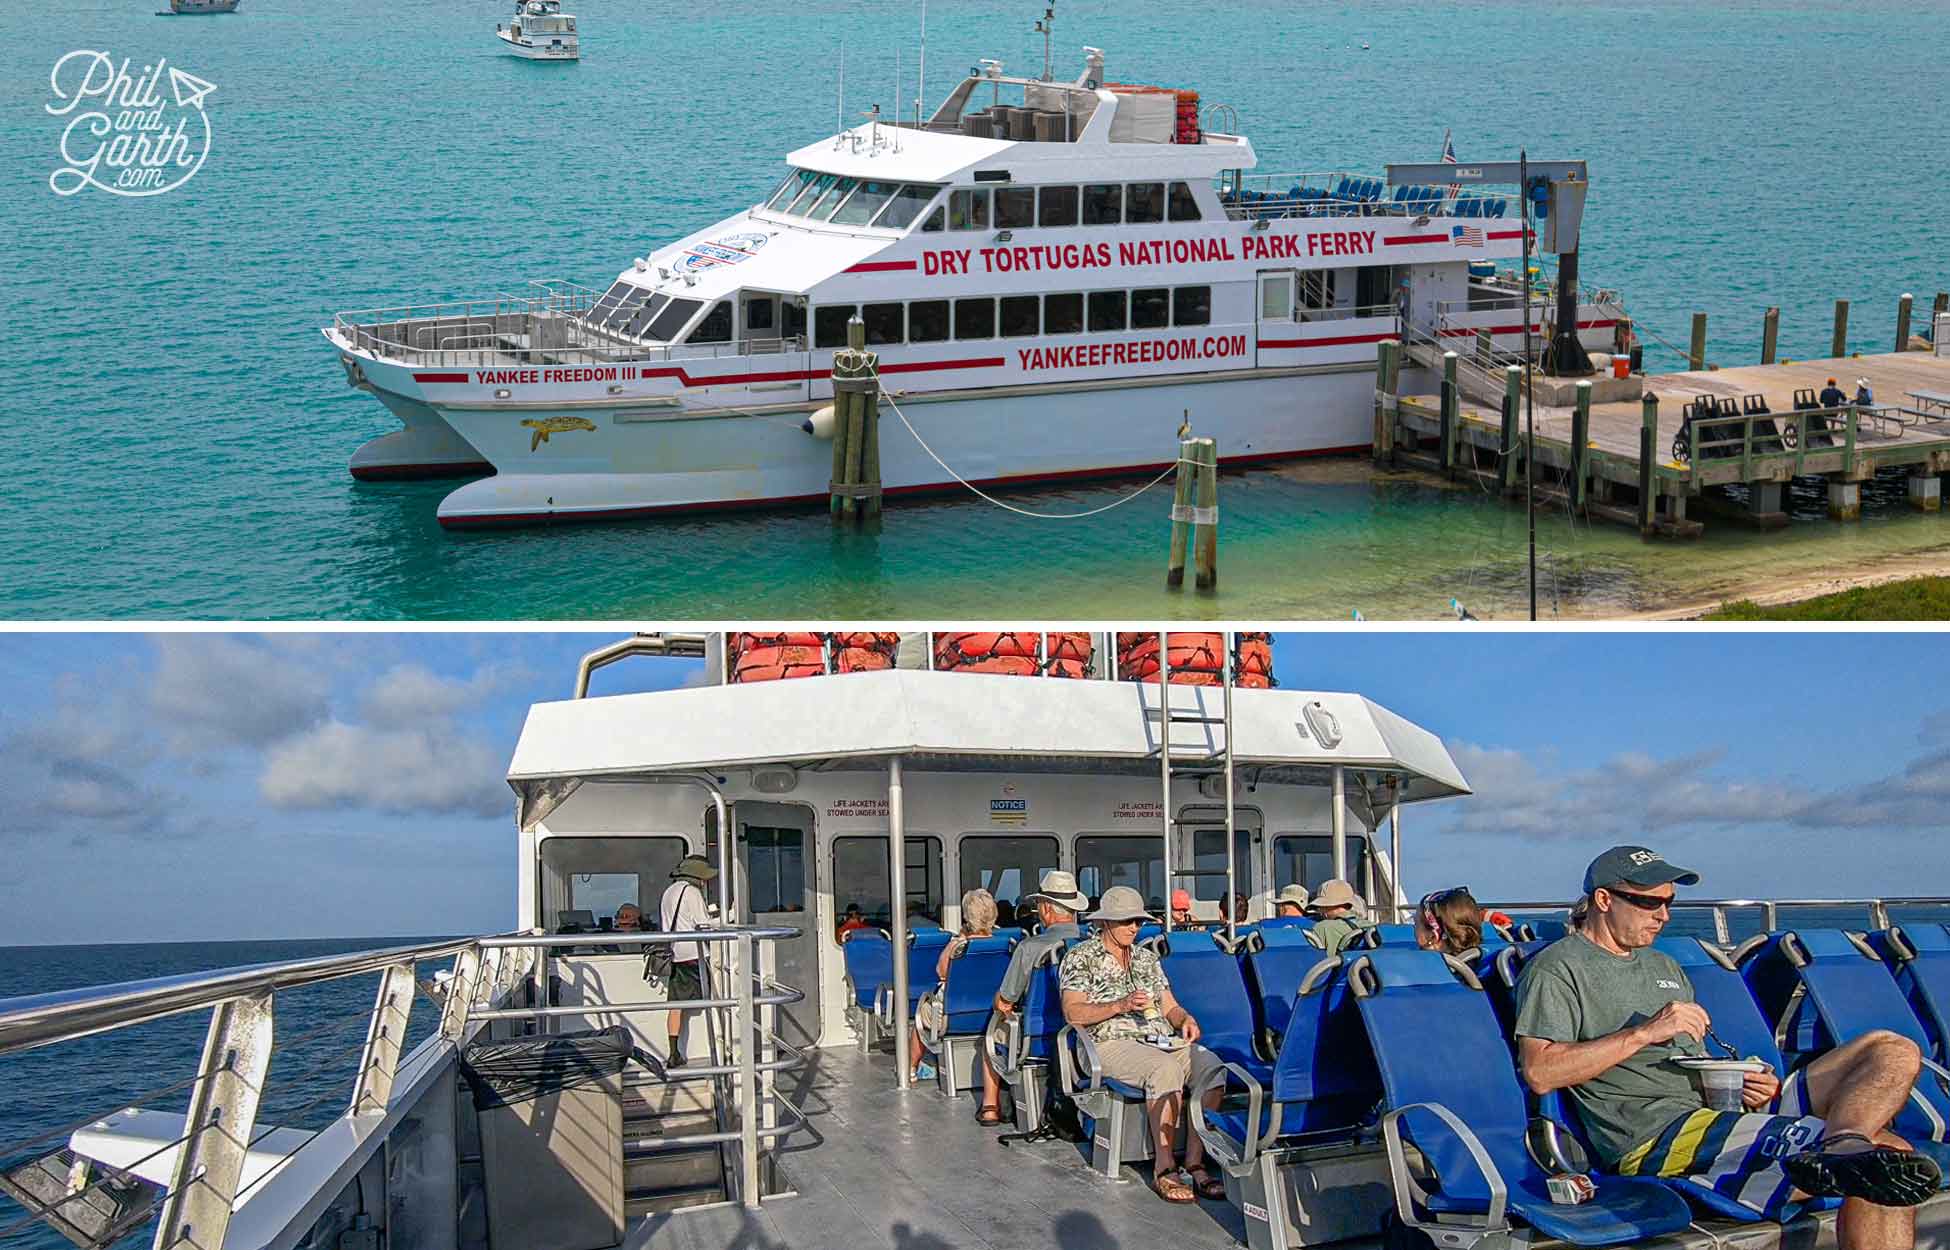 You'll need to book tickets for the official Dry Tortugas National Park Ferry, The Yankee Freedom III months in advance